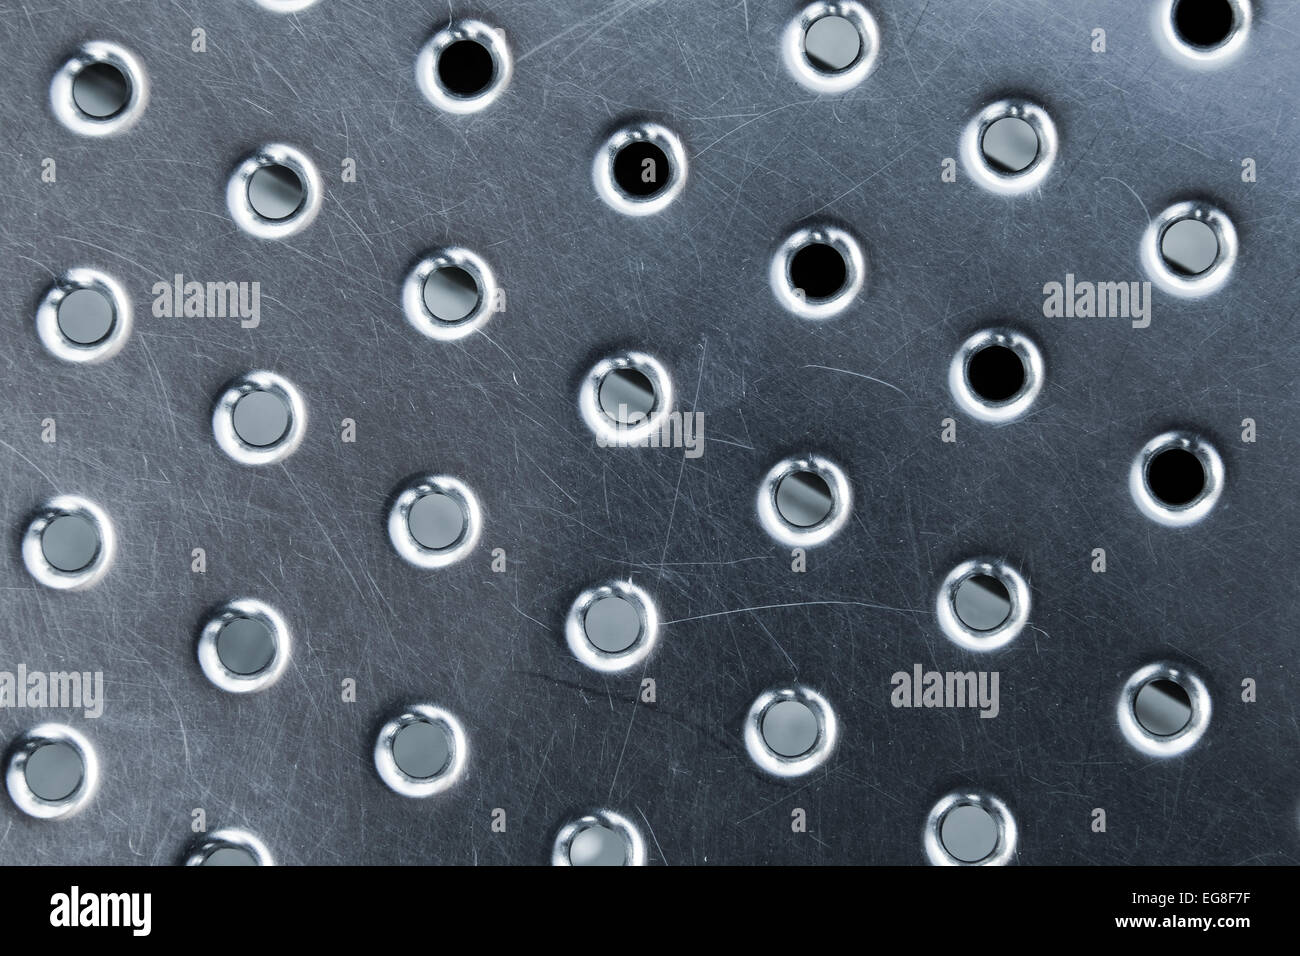 Shining metal panel surface with round holes, abstract background texture Stock Photo